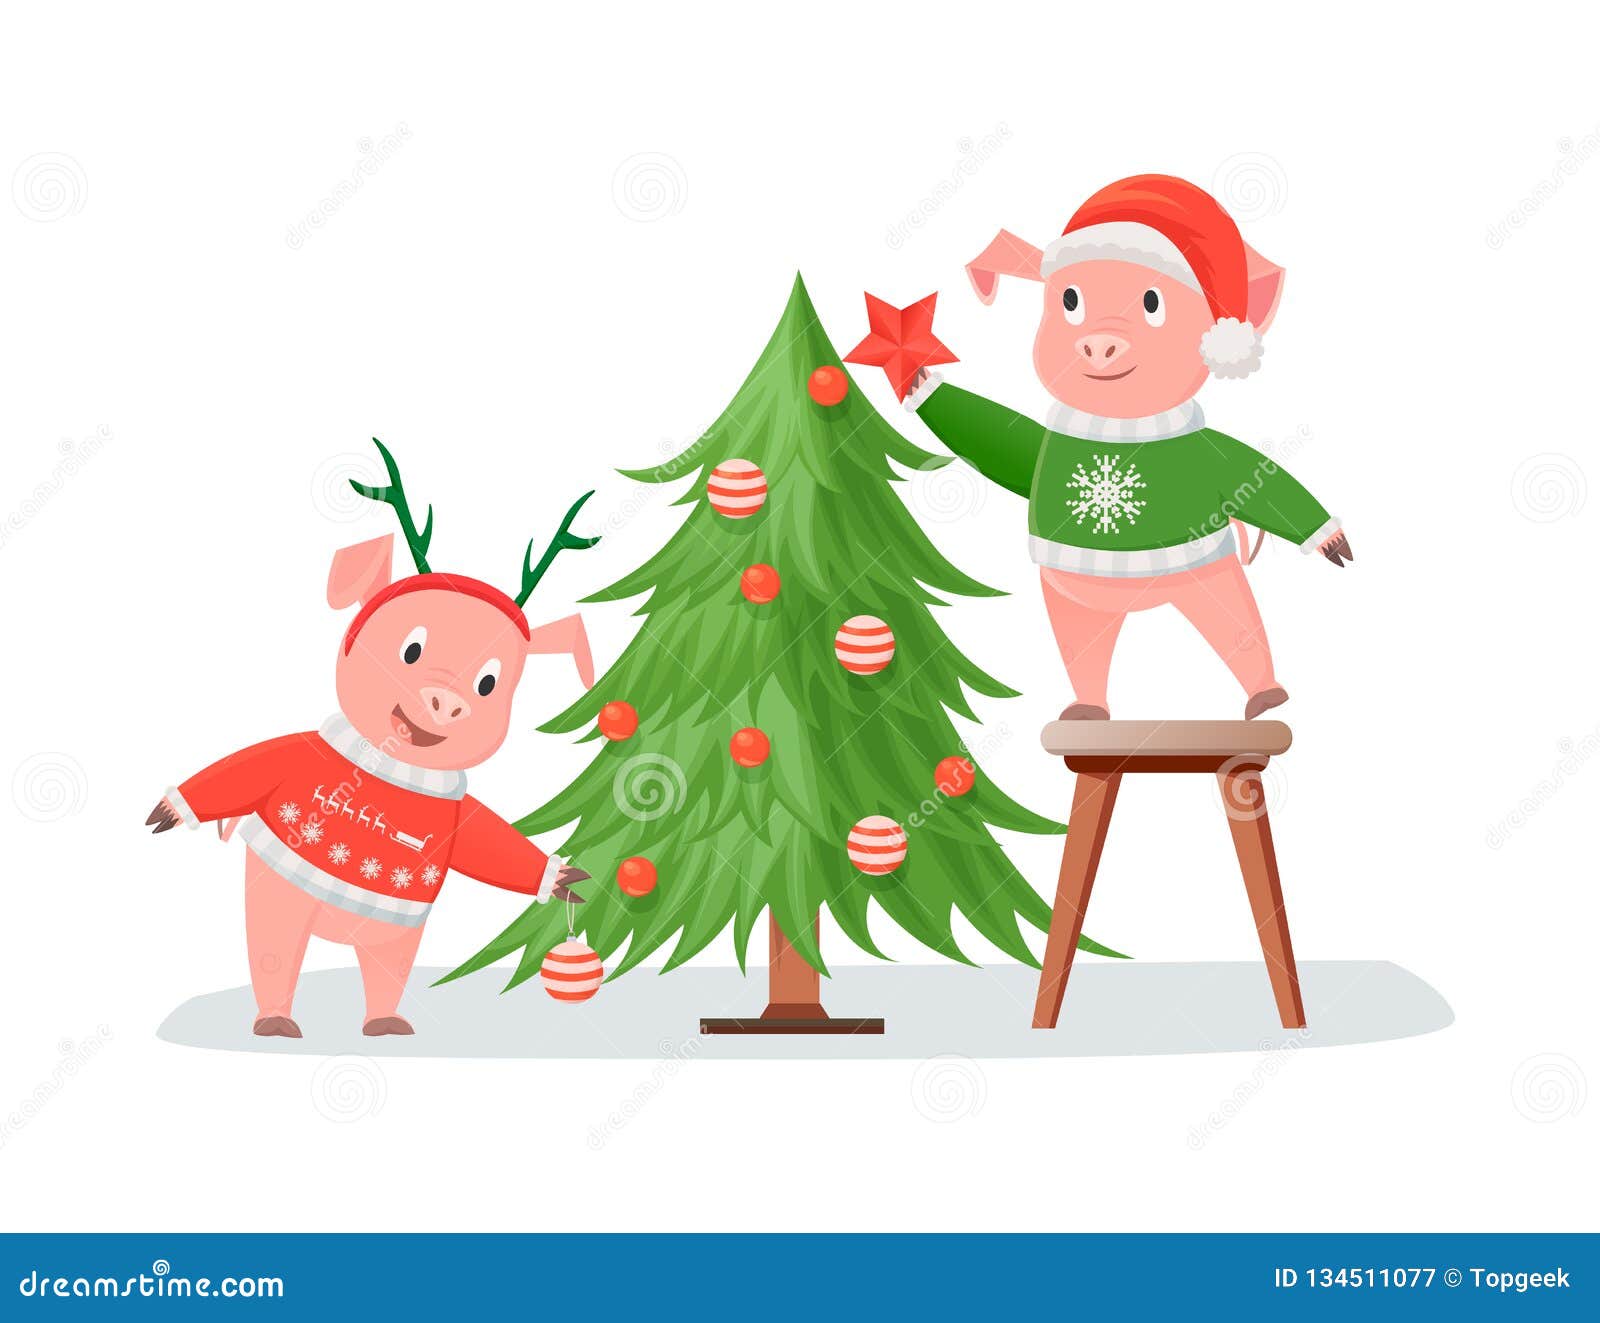 Pigs in Knitted Sweaters Decorating Christmas Tree Stock Vector ...